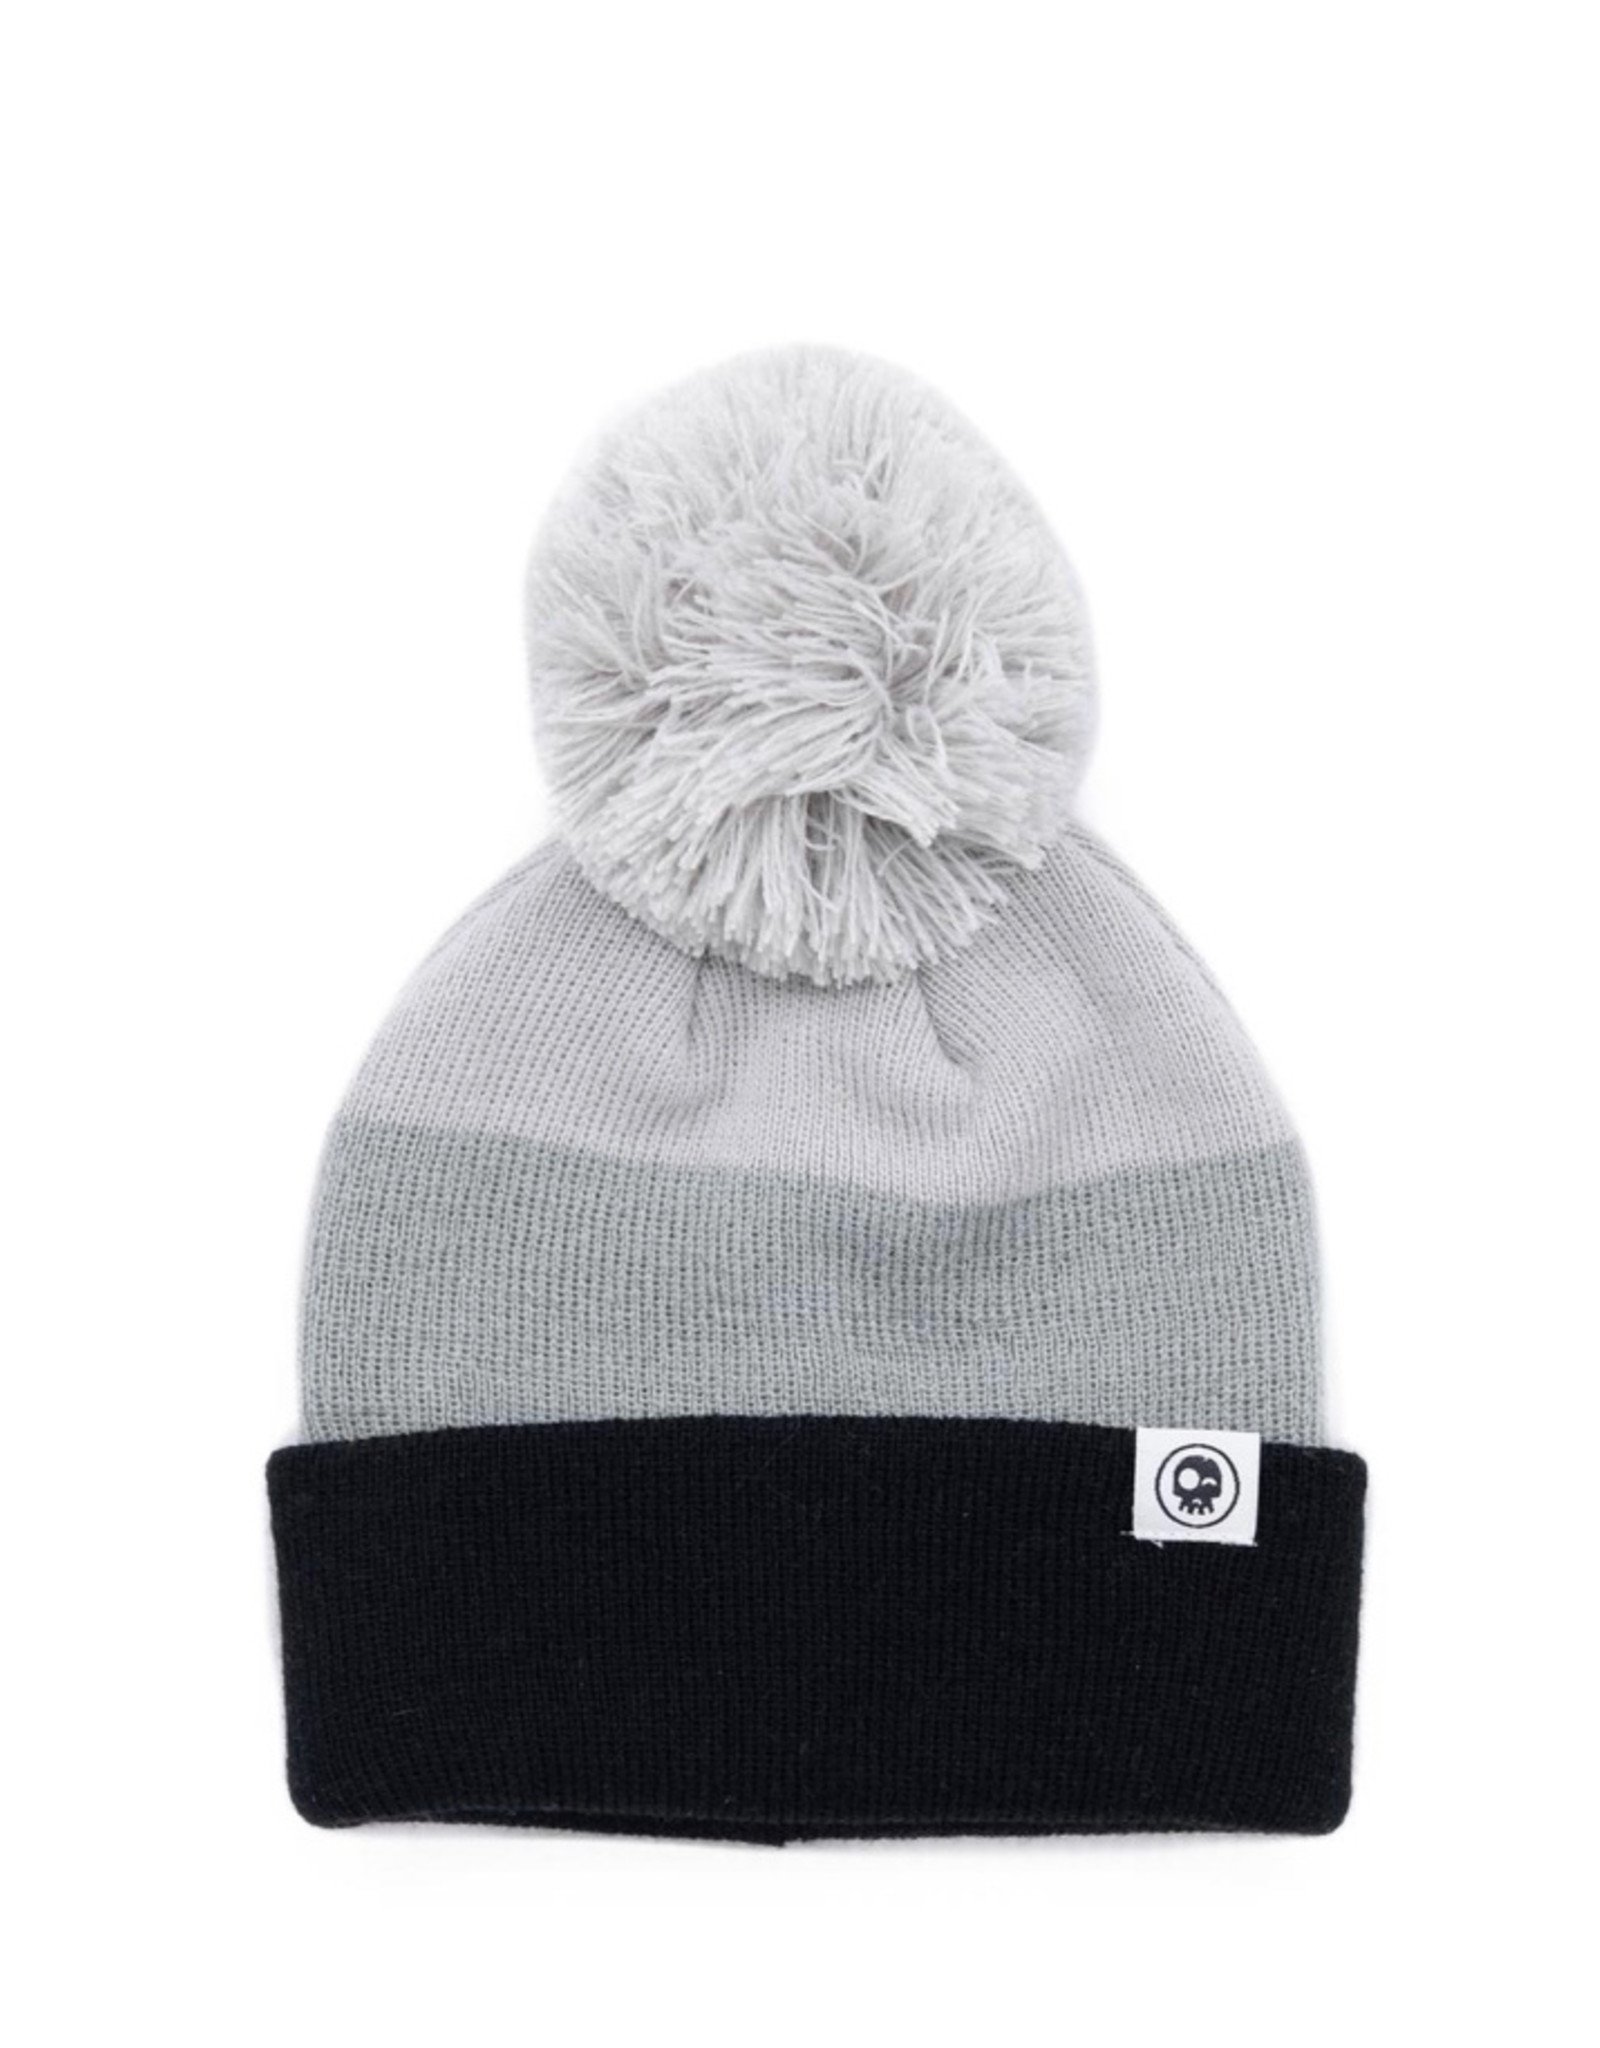 Headster Kids Headster - Tricolor Toque